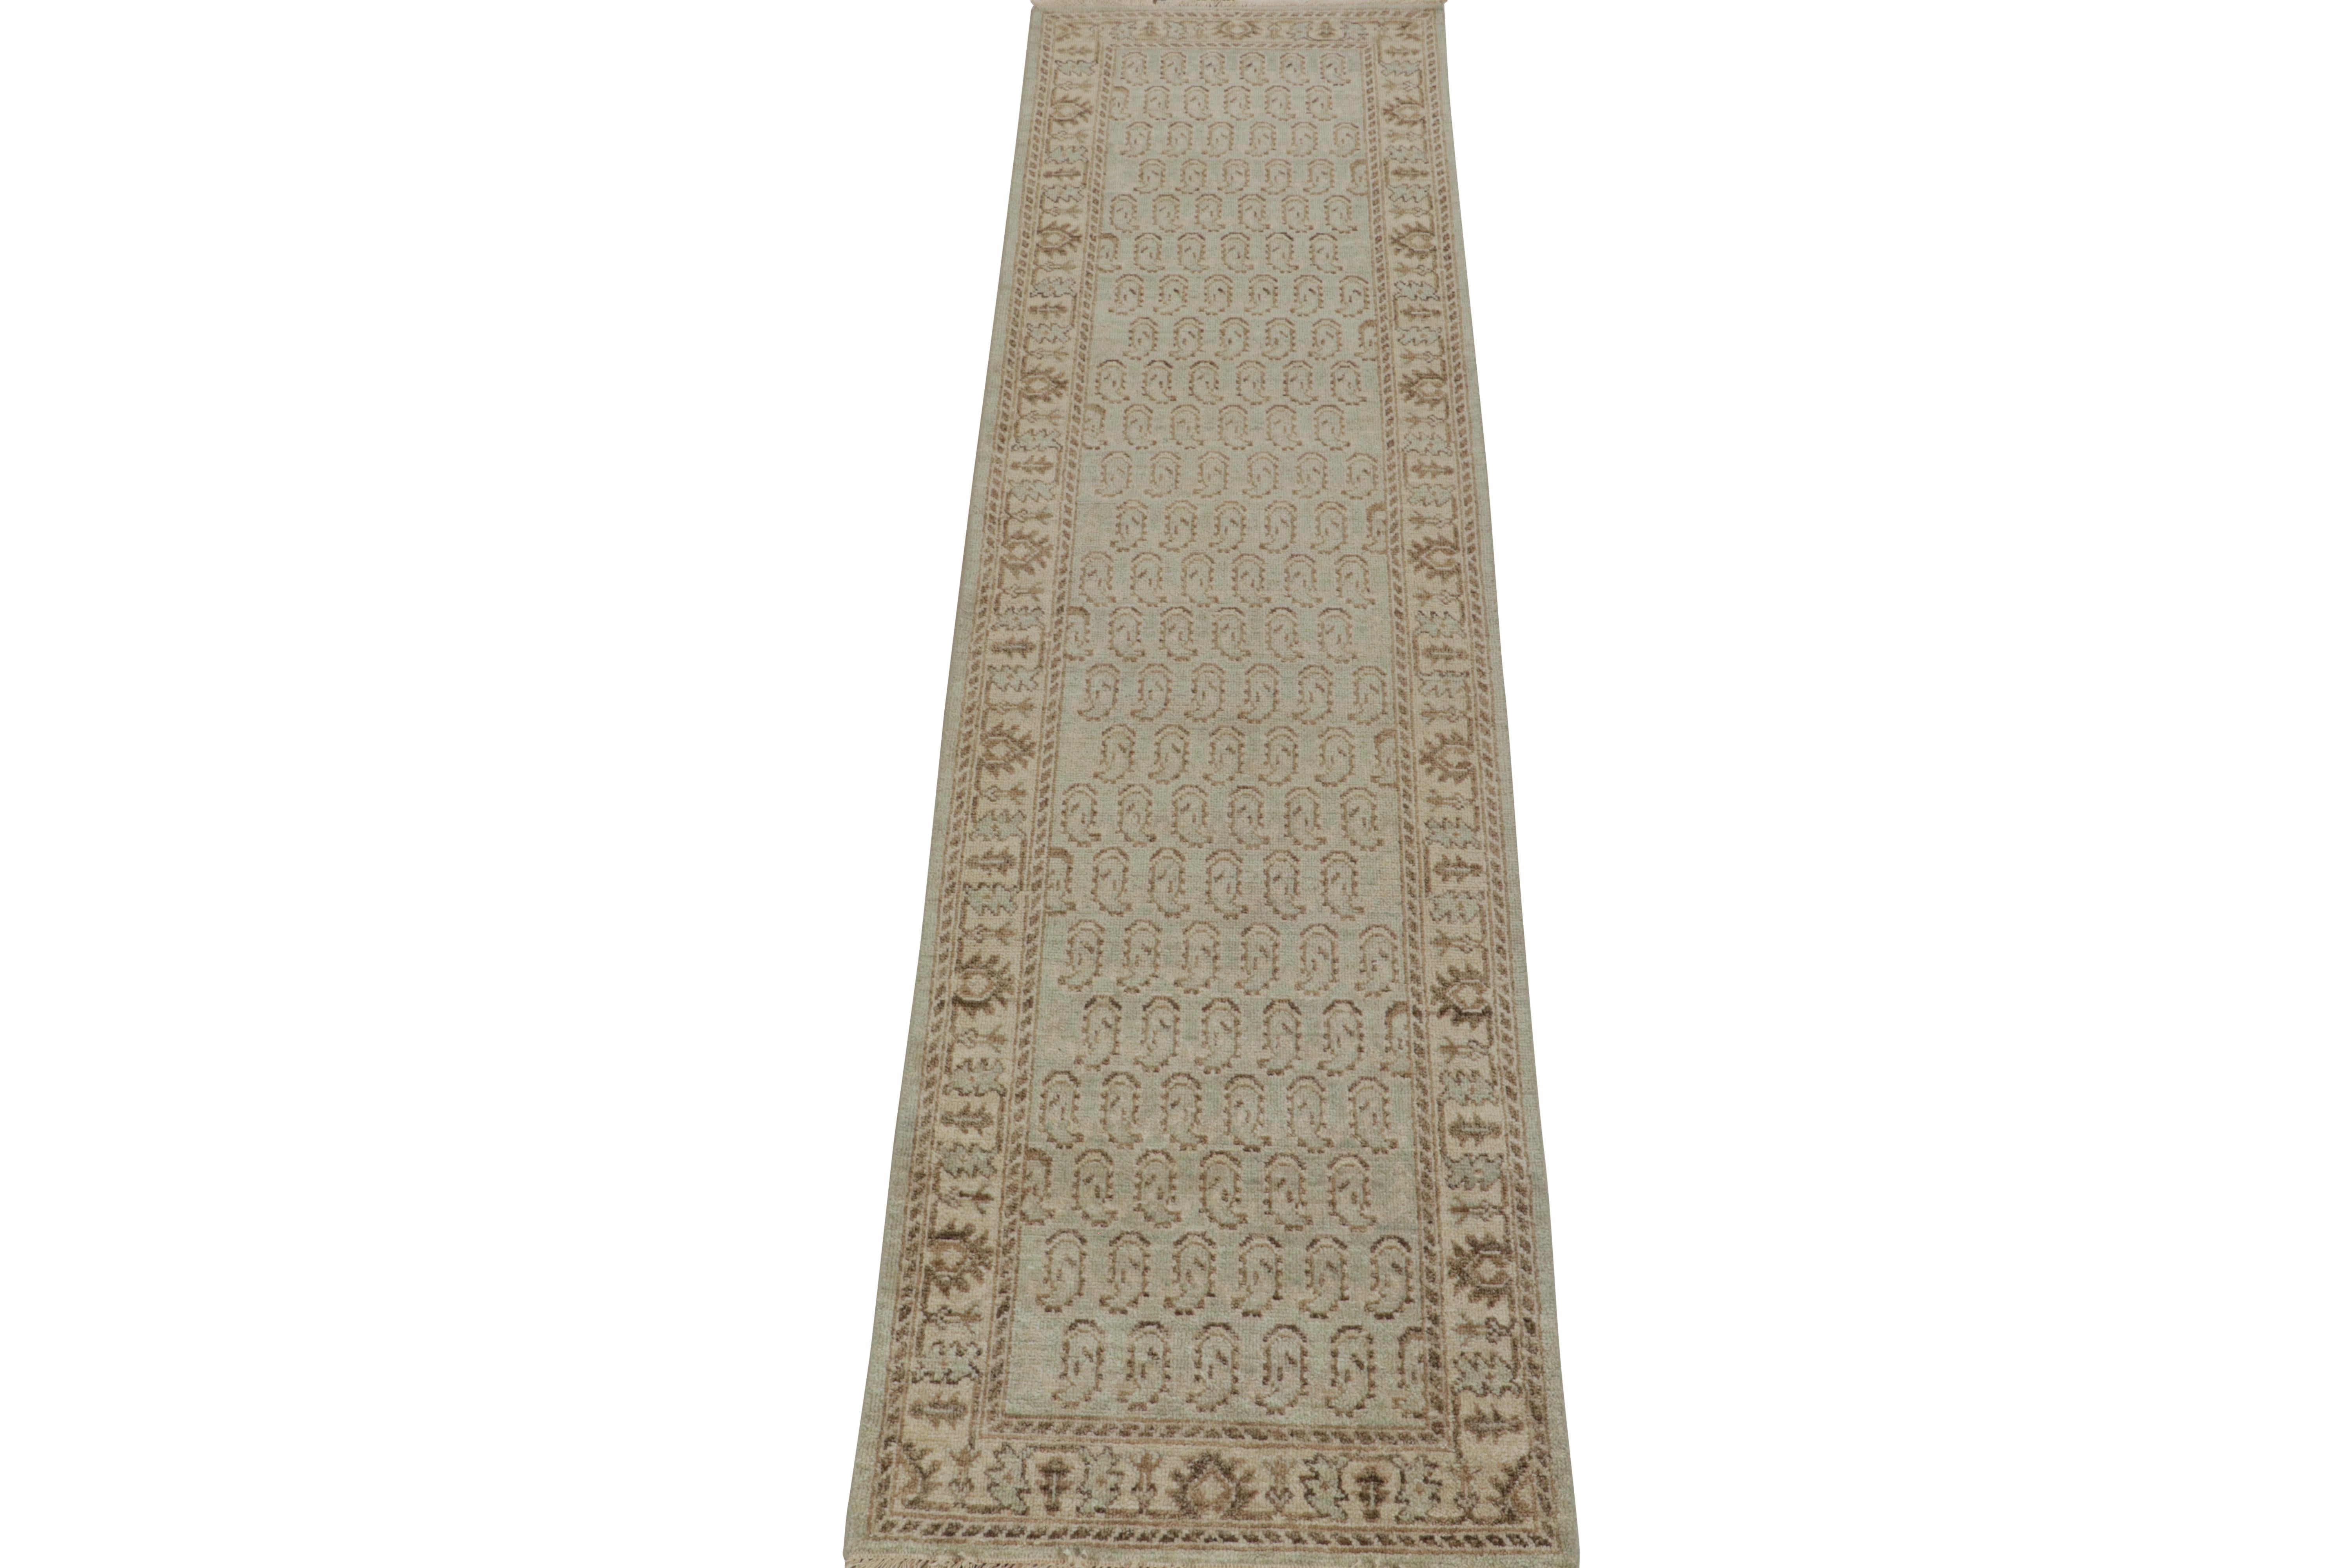 This contemporary 3x10 runner is a new addition to Rug & Kilim's Homage Collection. Hand-knotted in wool and cotton, it recaptures caucasian tribal patterns in soft colors and approachable demeanor.
Further on the Design:
This particular rug enjoys